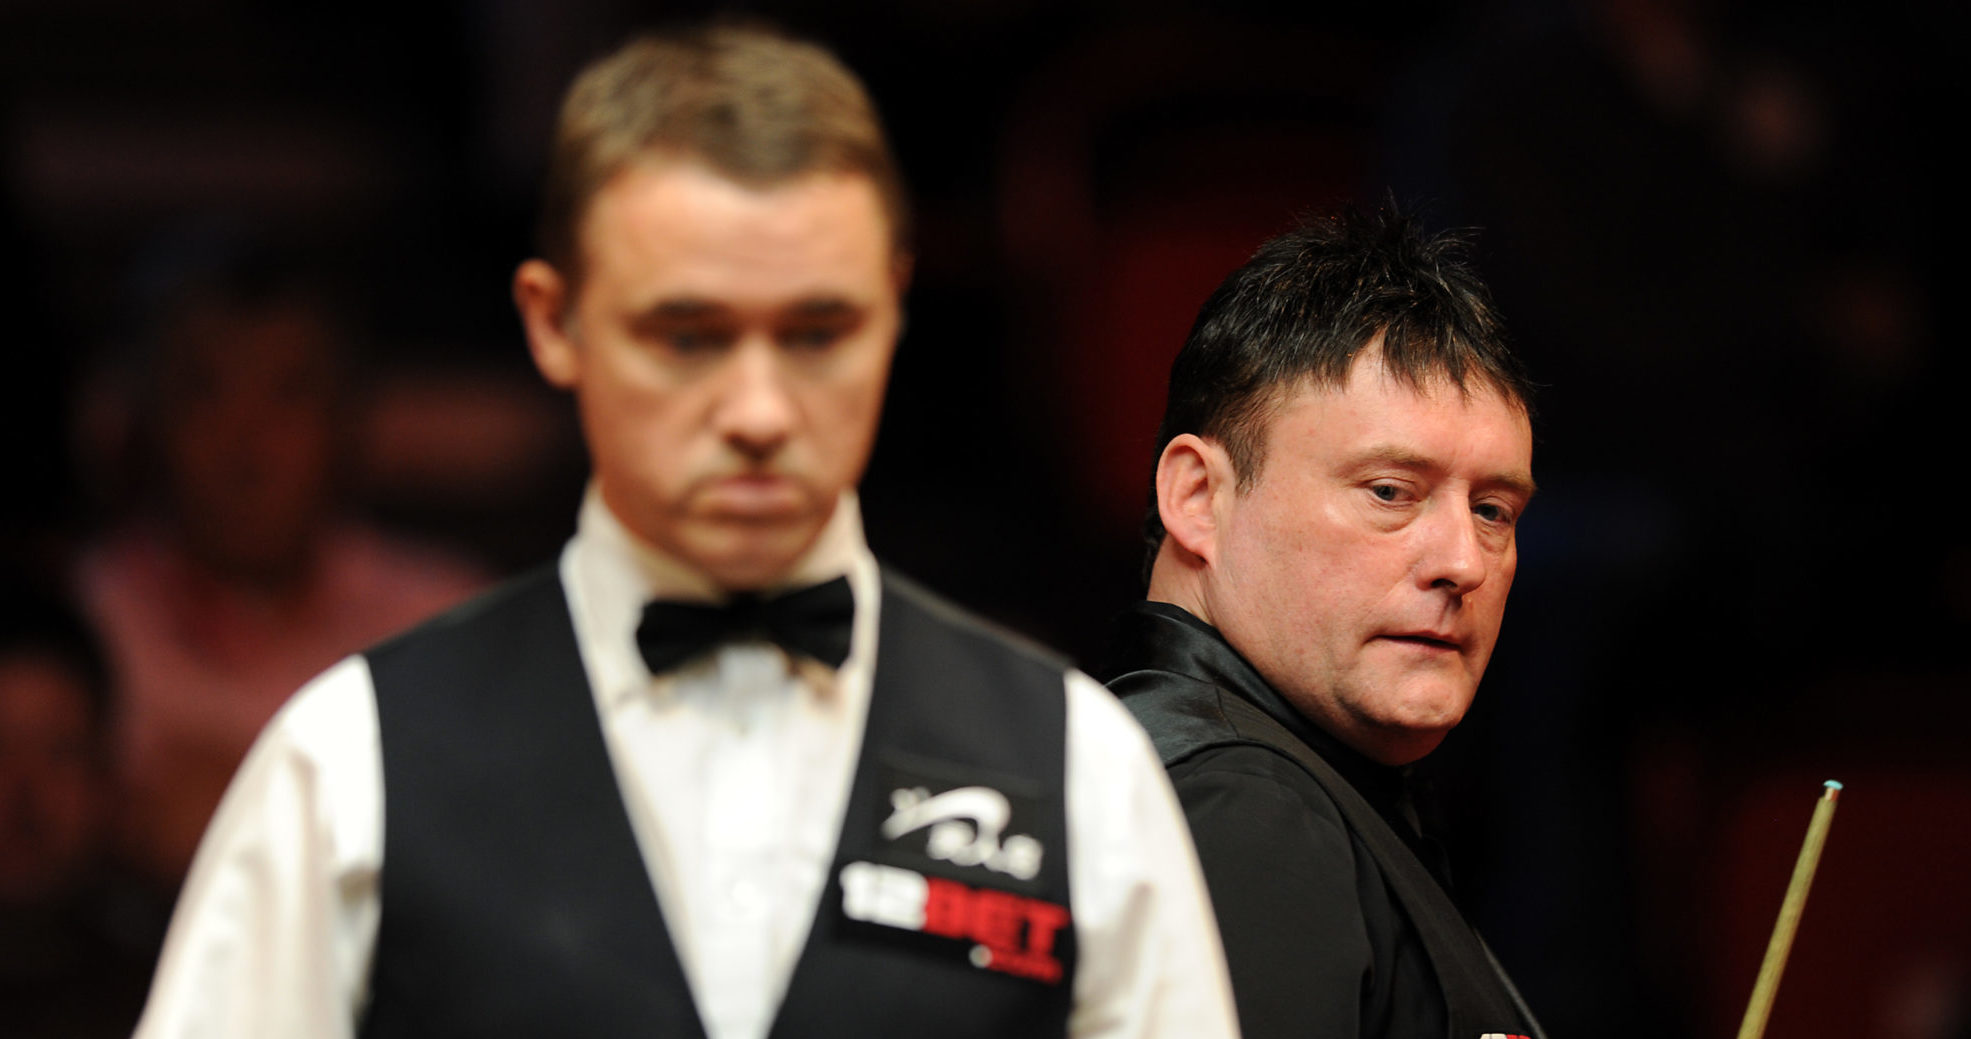 Henry and White to rekindle old rivalry in World Snooker qualifiers Newstalk